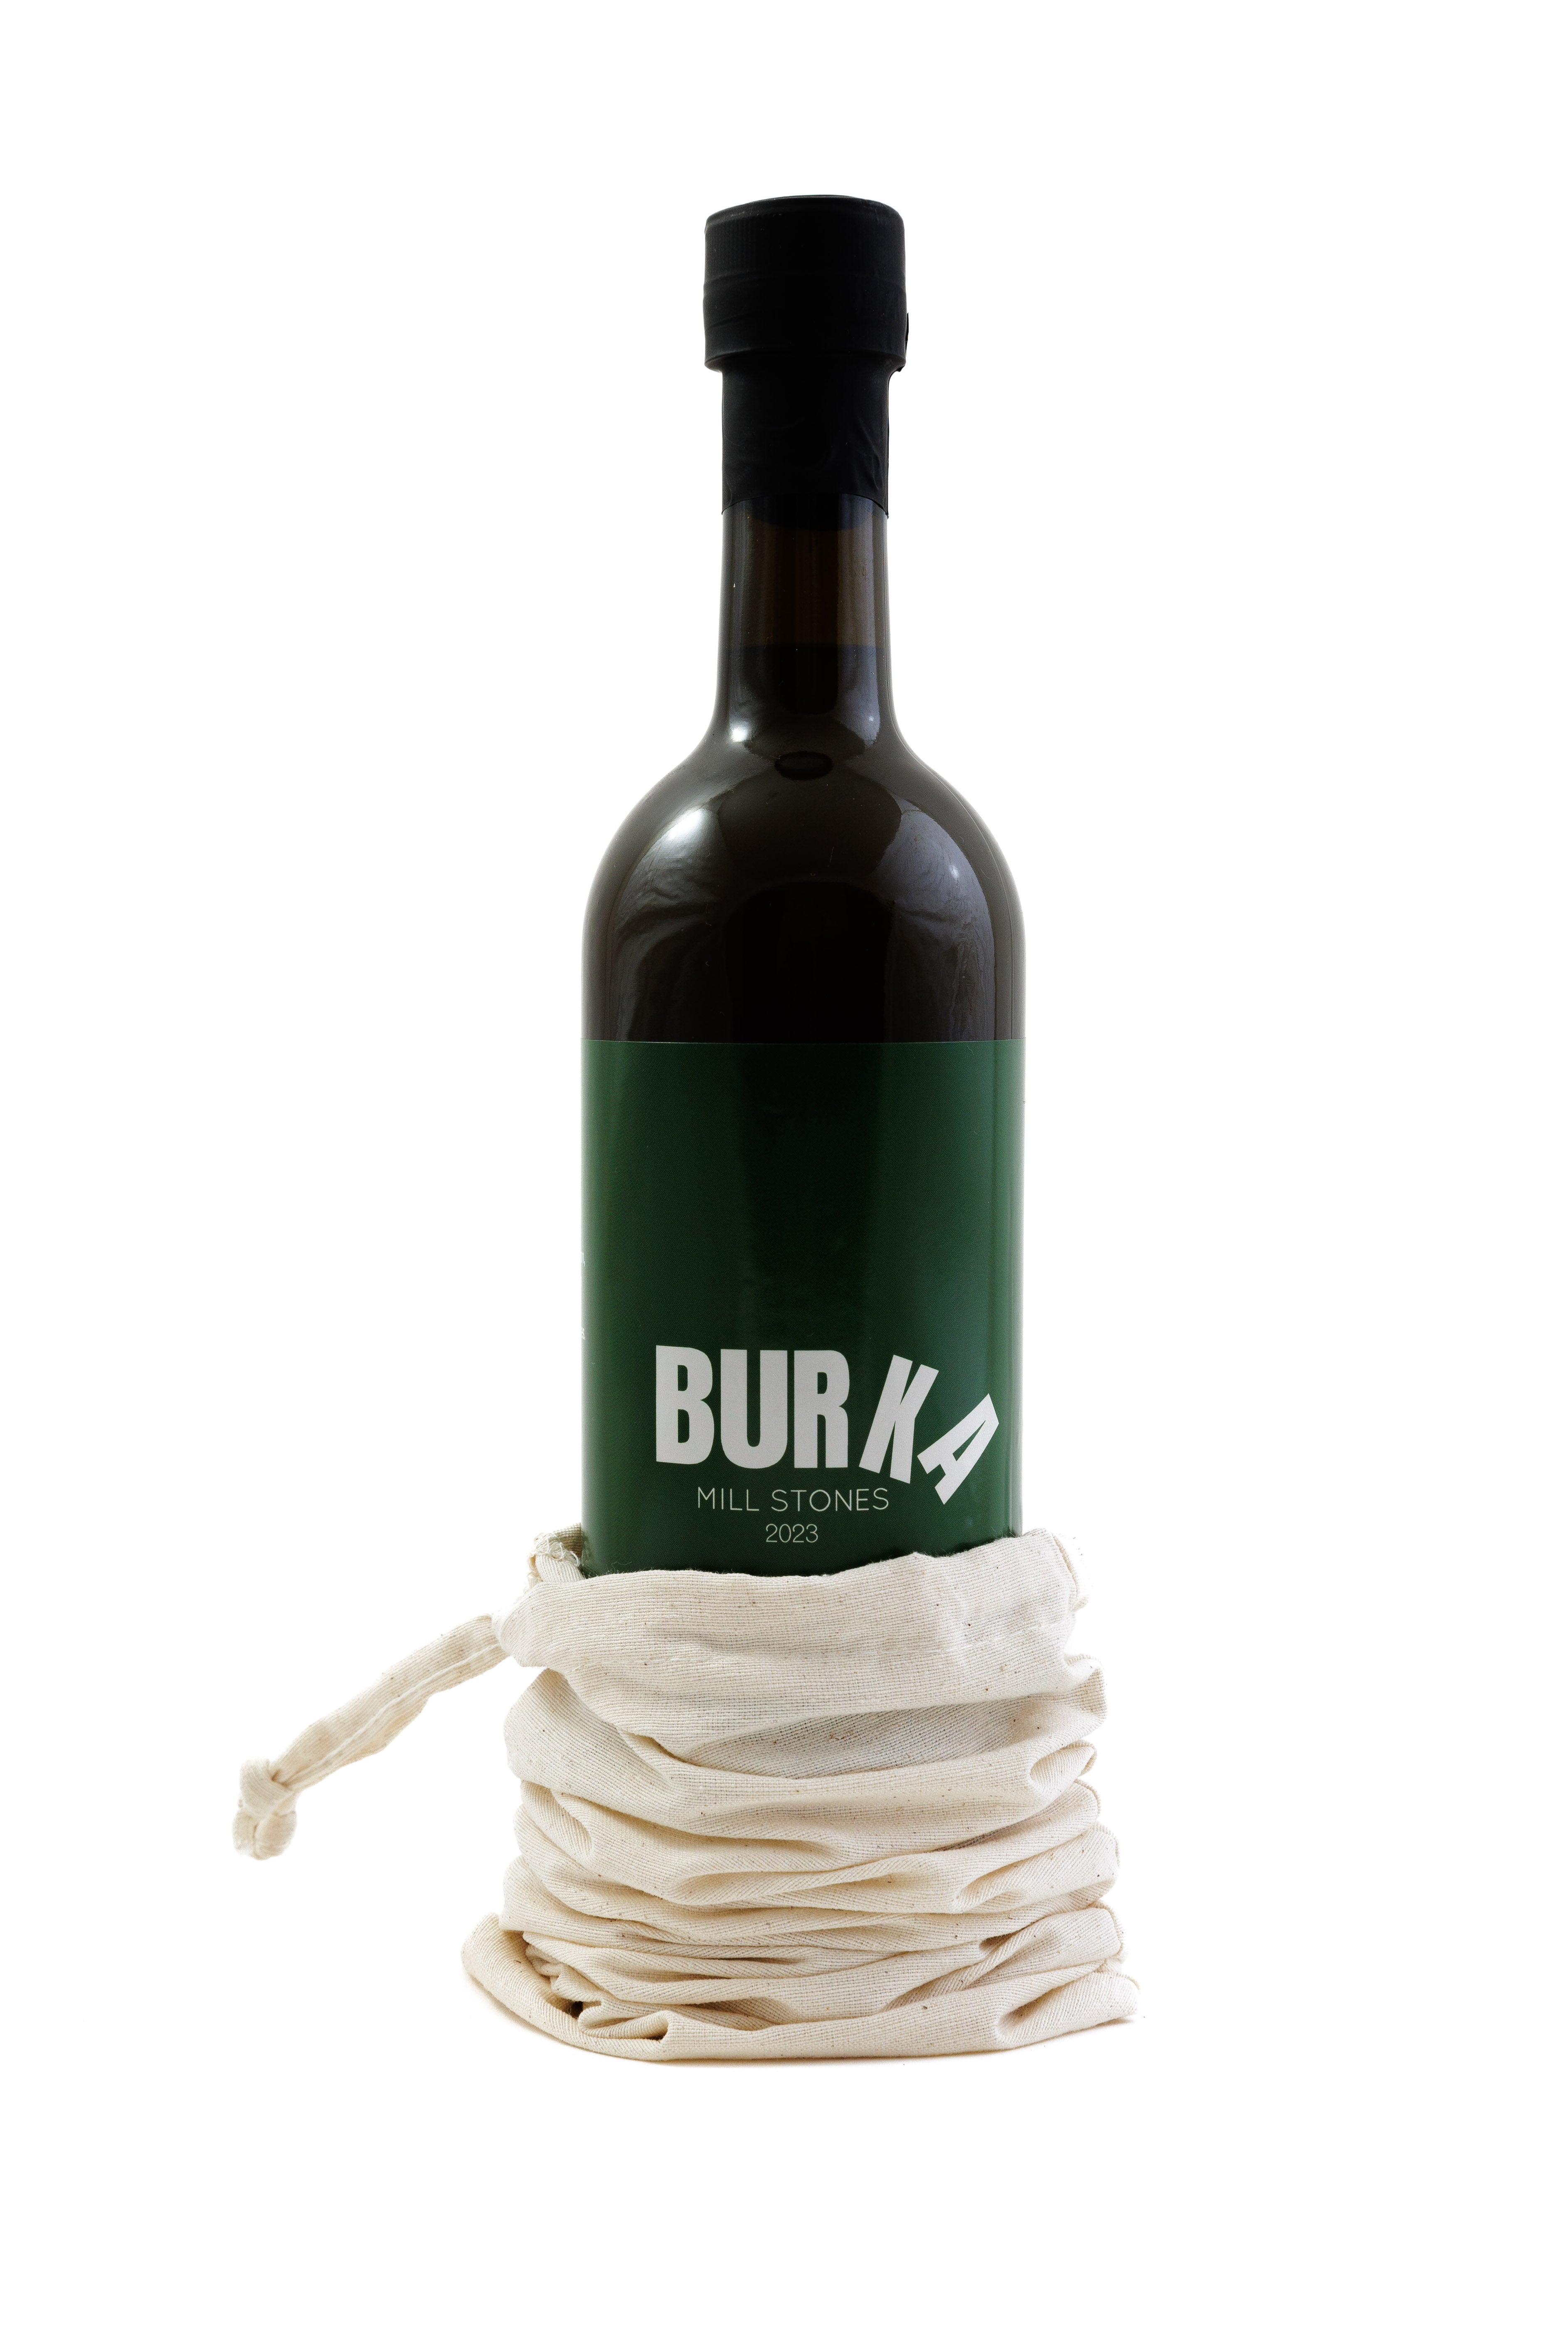 Burka's Millstone Extracted Olive Oil - Spicy, Peppery and Powerful [Harvest Year: 2023]